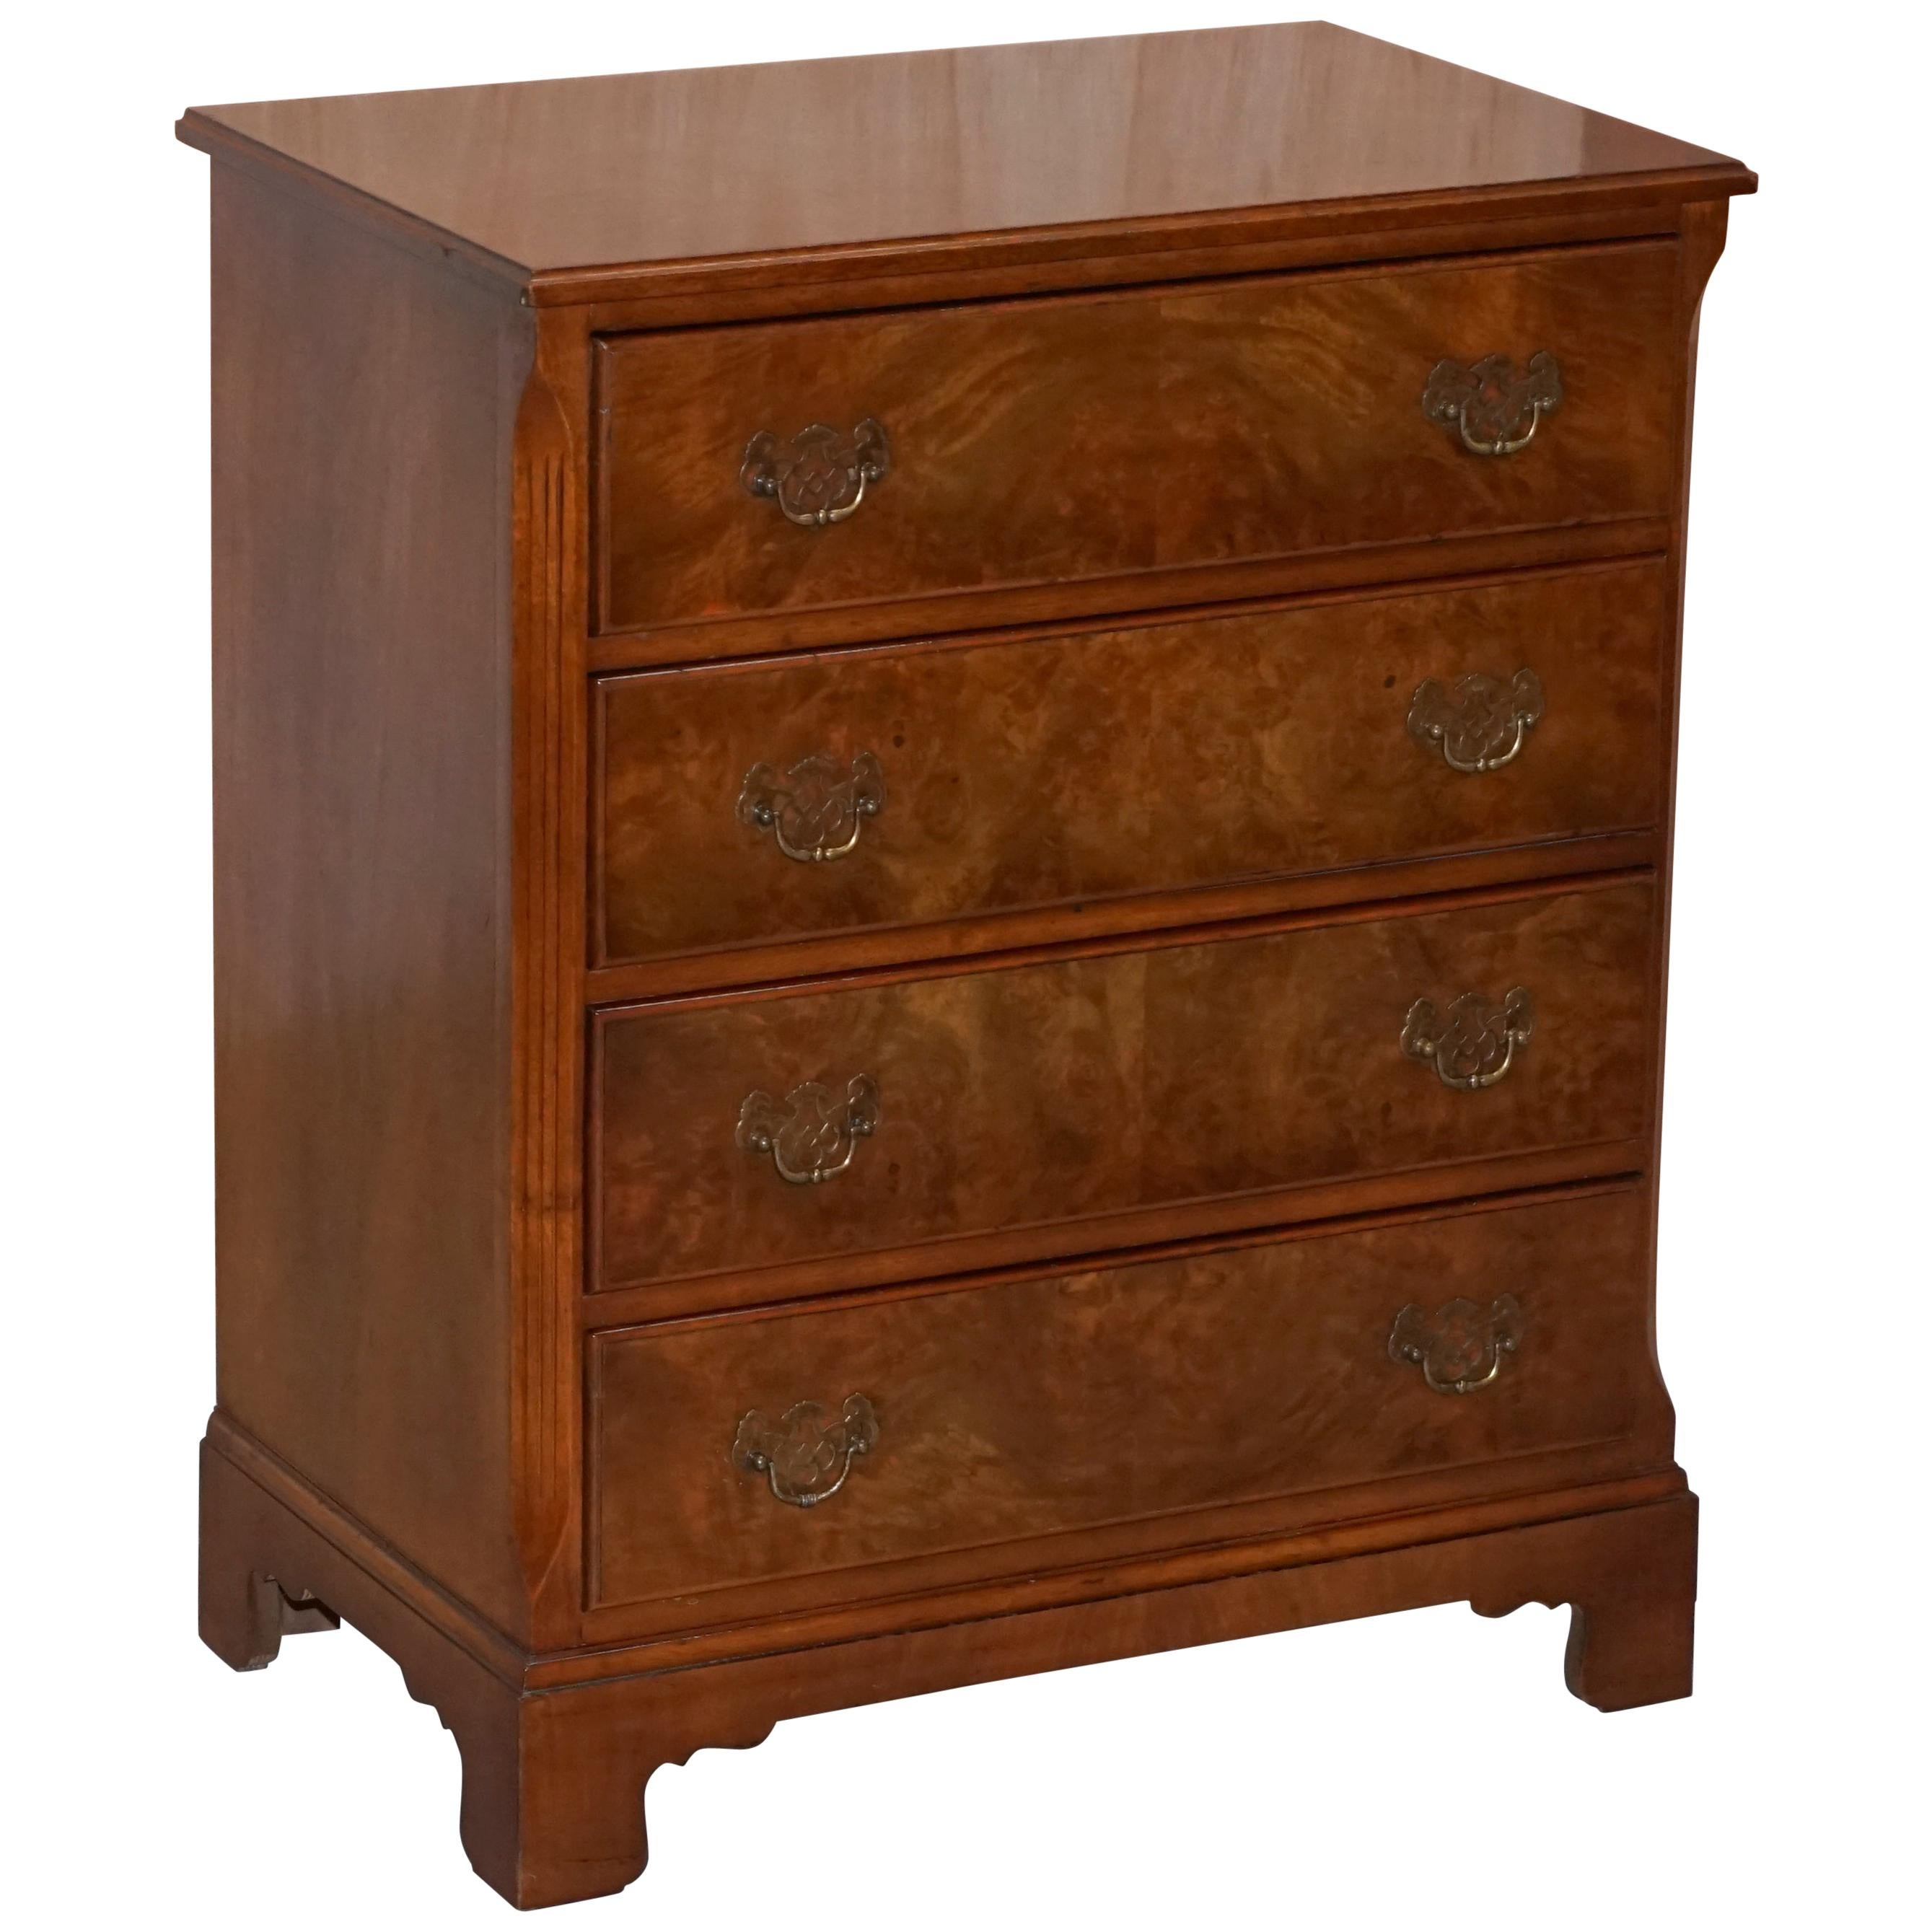 Small circa 1930s-1950s Walnut Chest of Drawers Side Table Tall